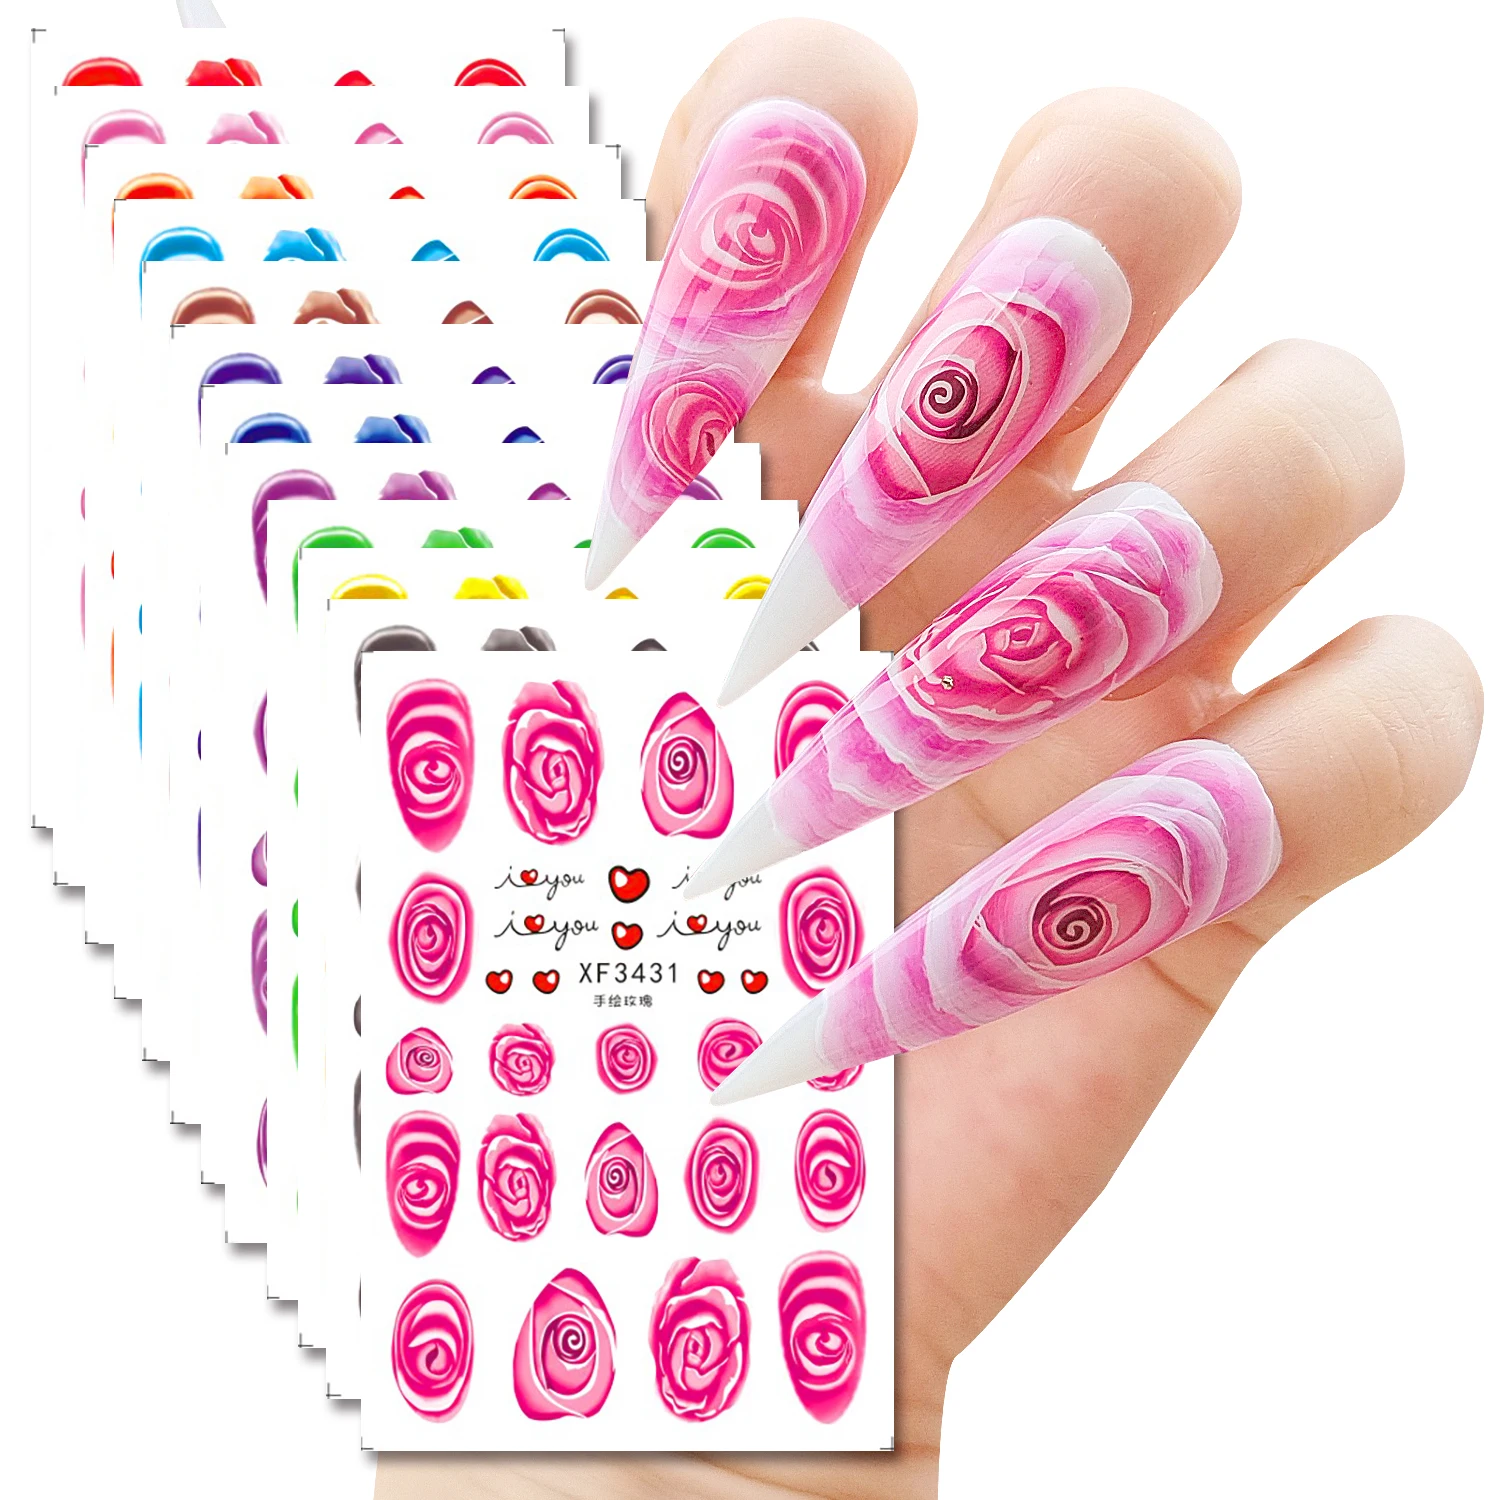 12 Sheets Vairous Colorful Hand Painted Rose Pattern Adhesive Nail Art Stickers Decals Manicure Accessories Tips XF3430-XF3441